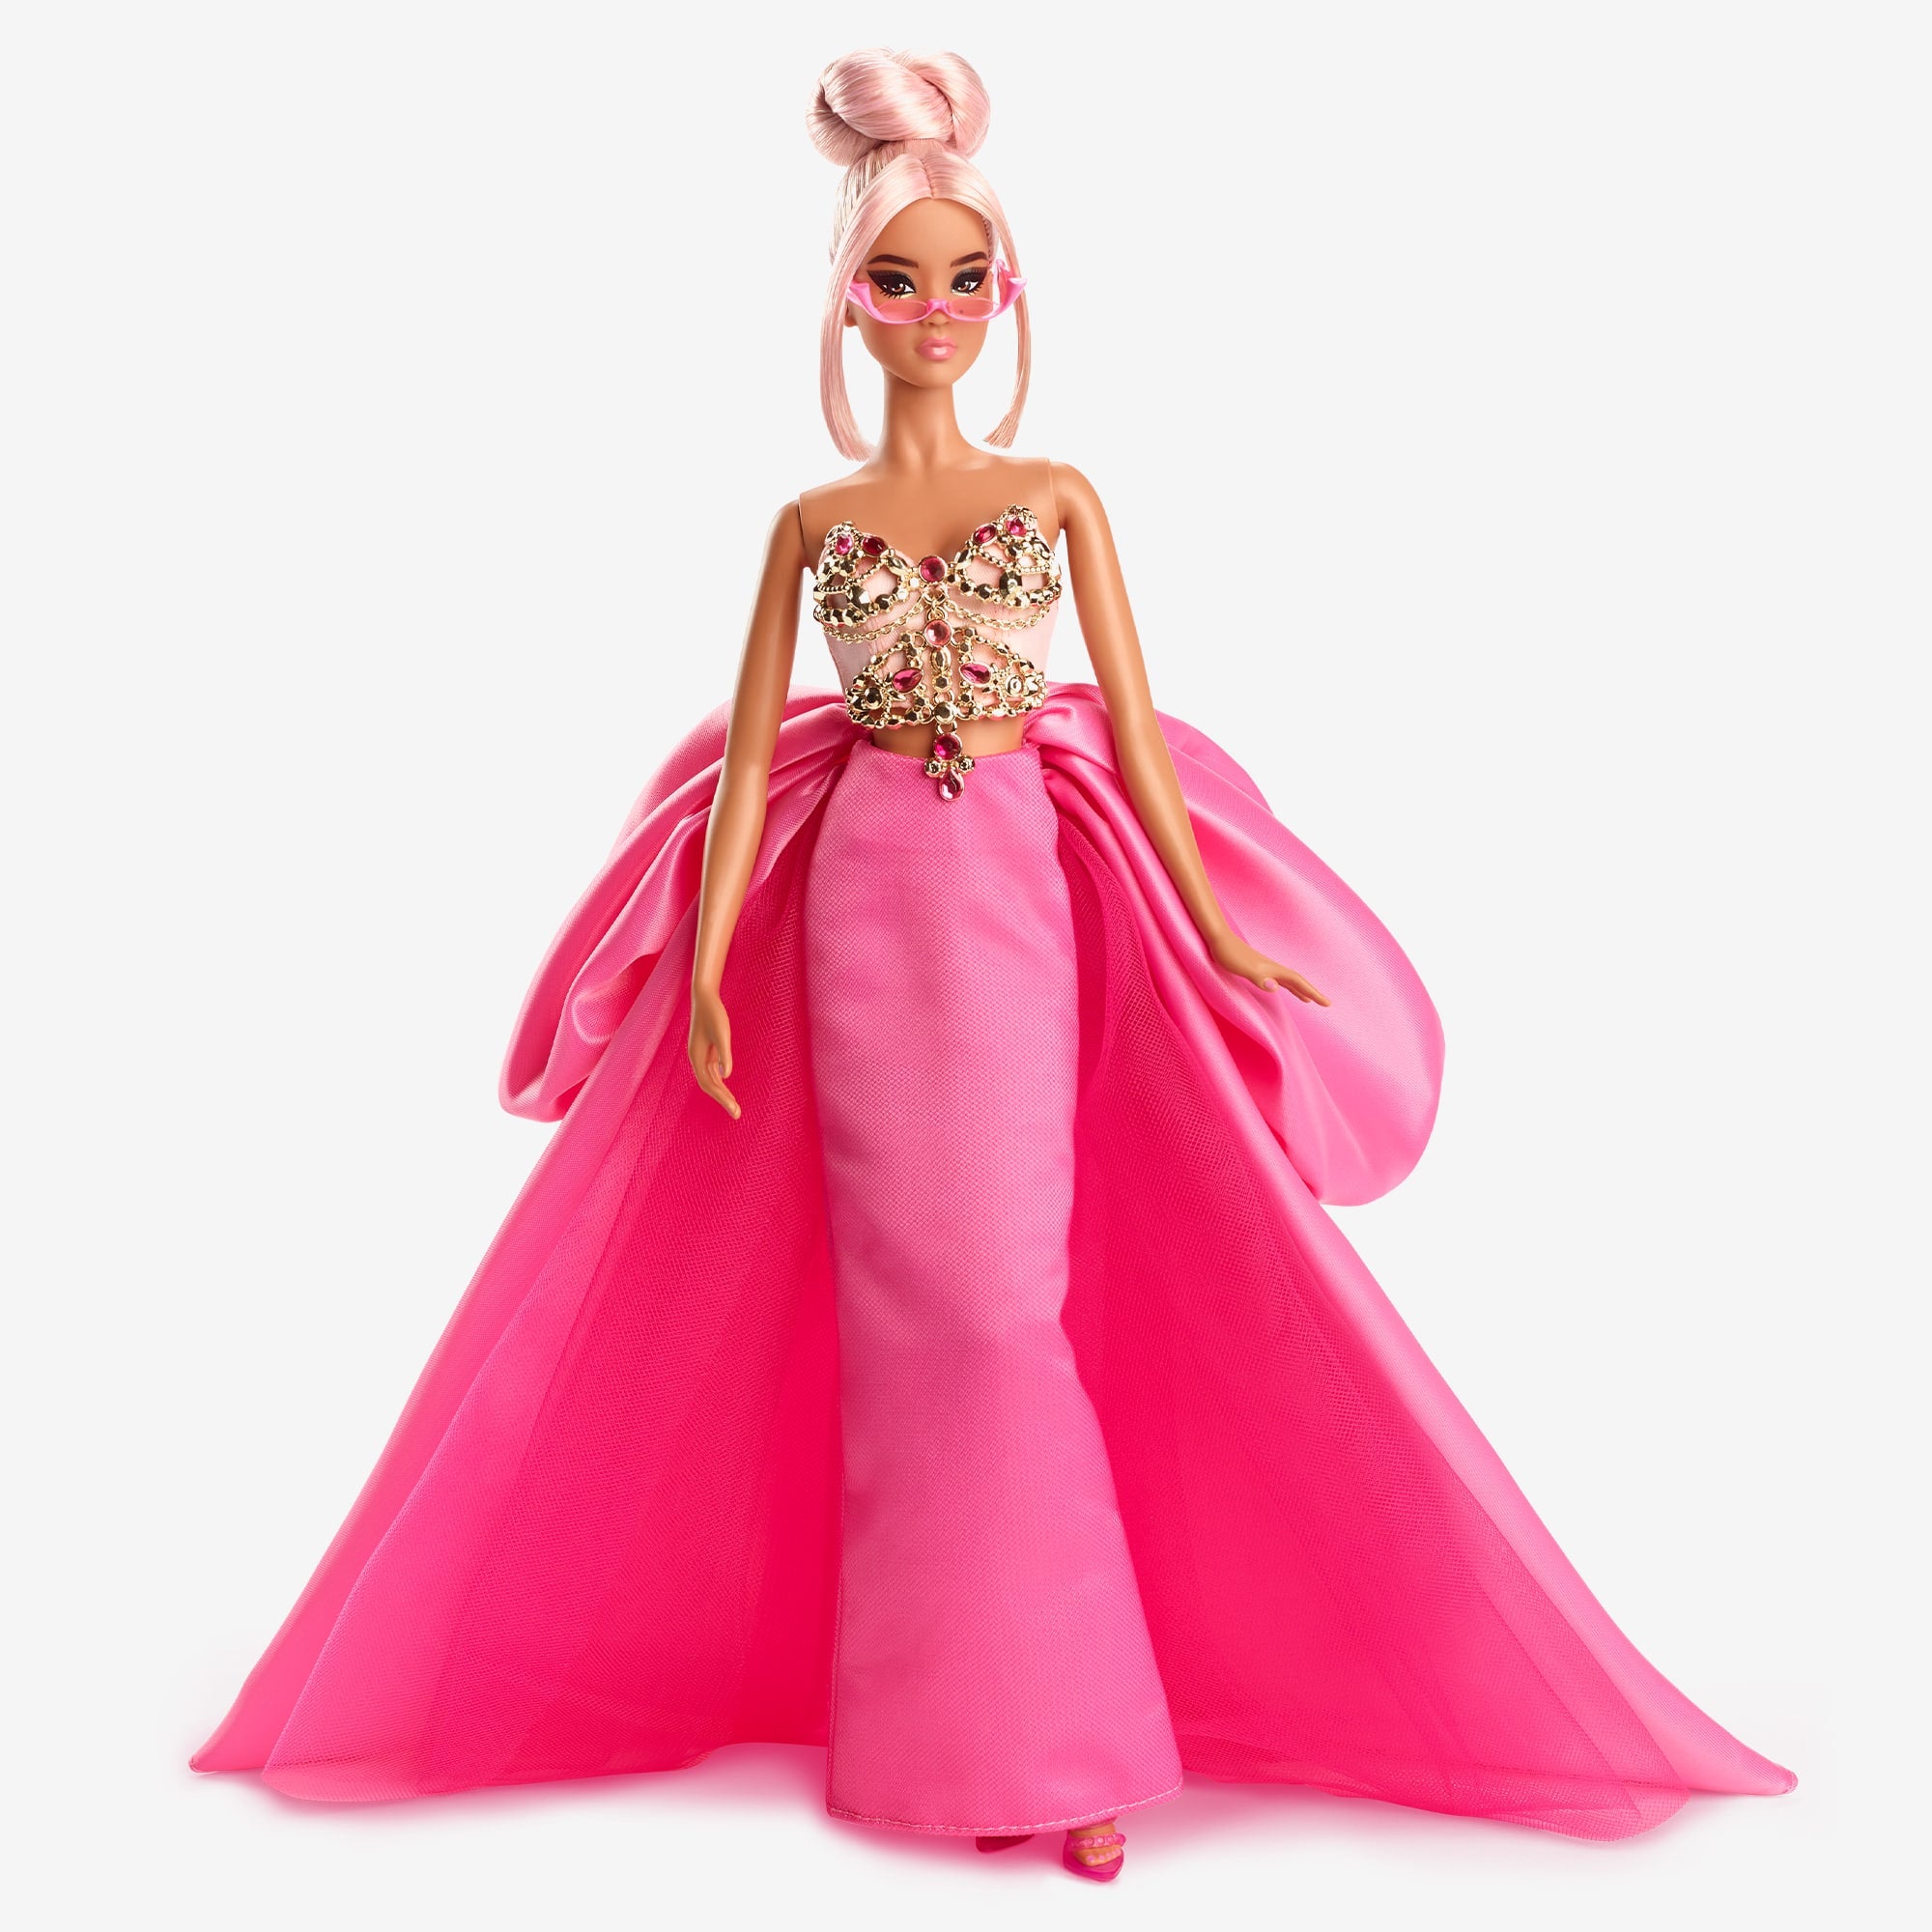 Barbie Pink Collection Doll | HJW86 | MATTEL